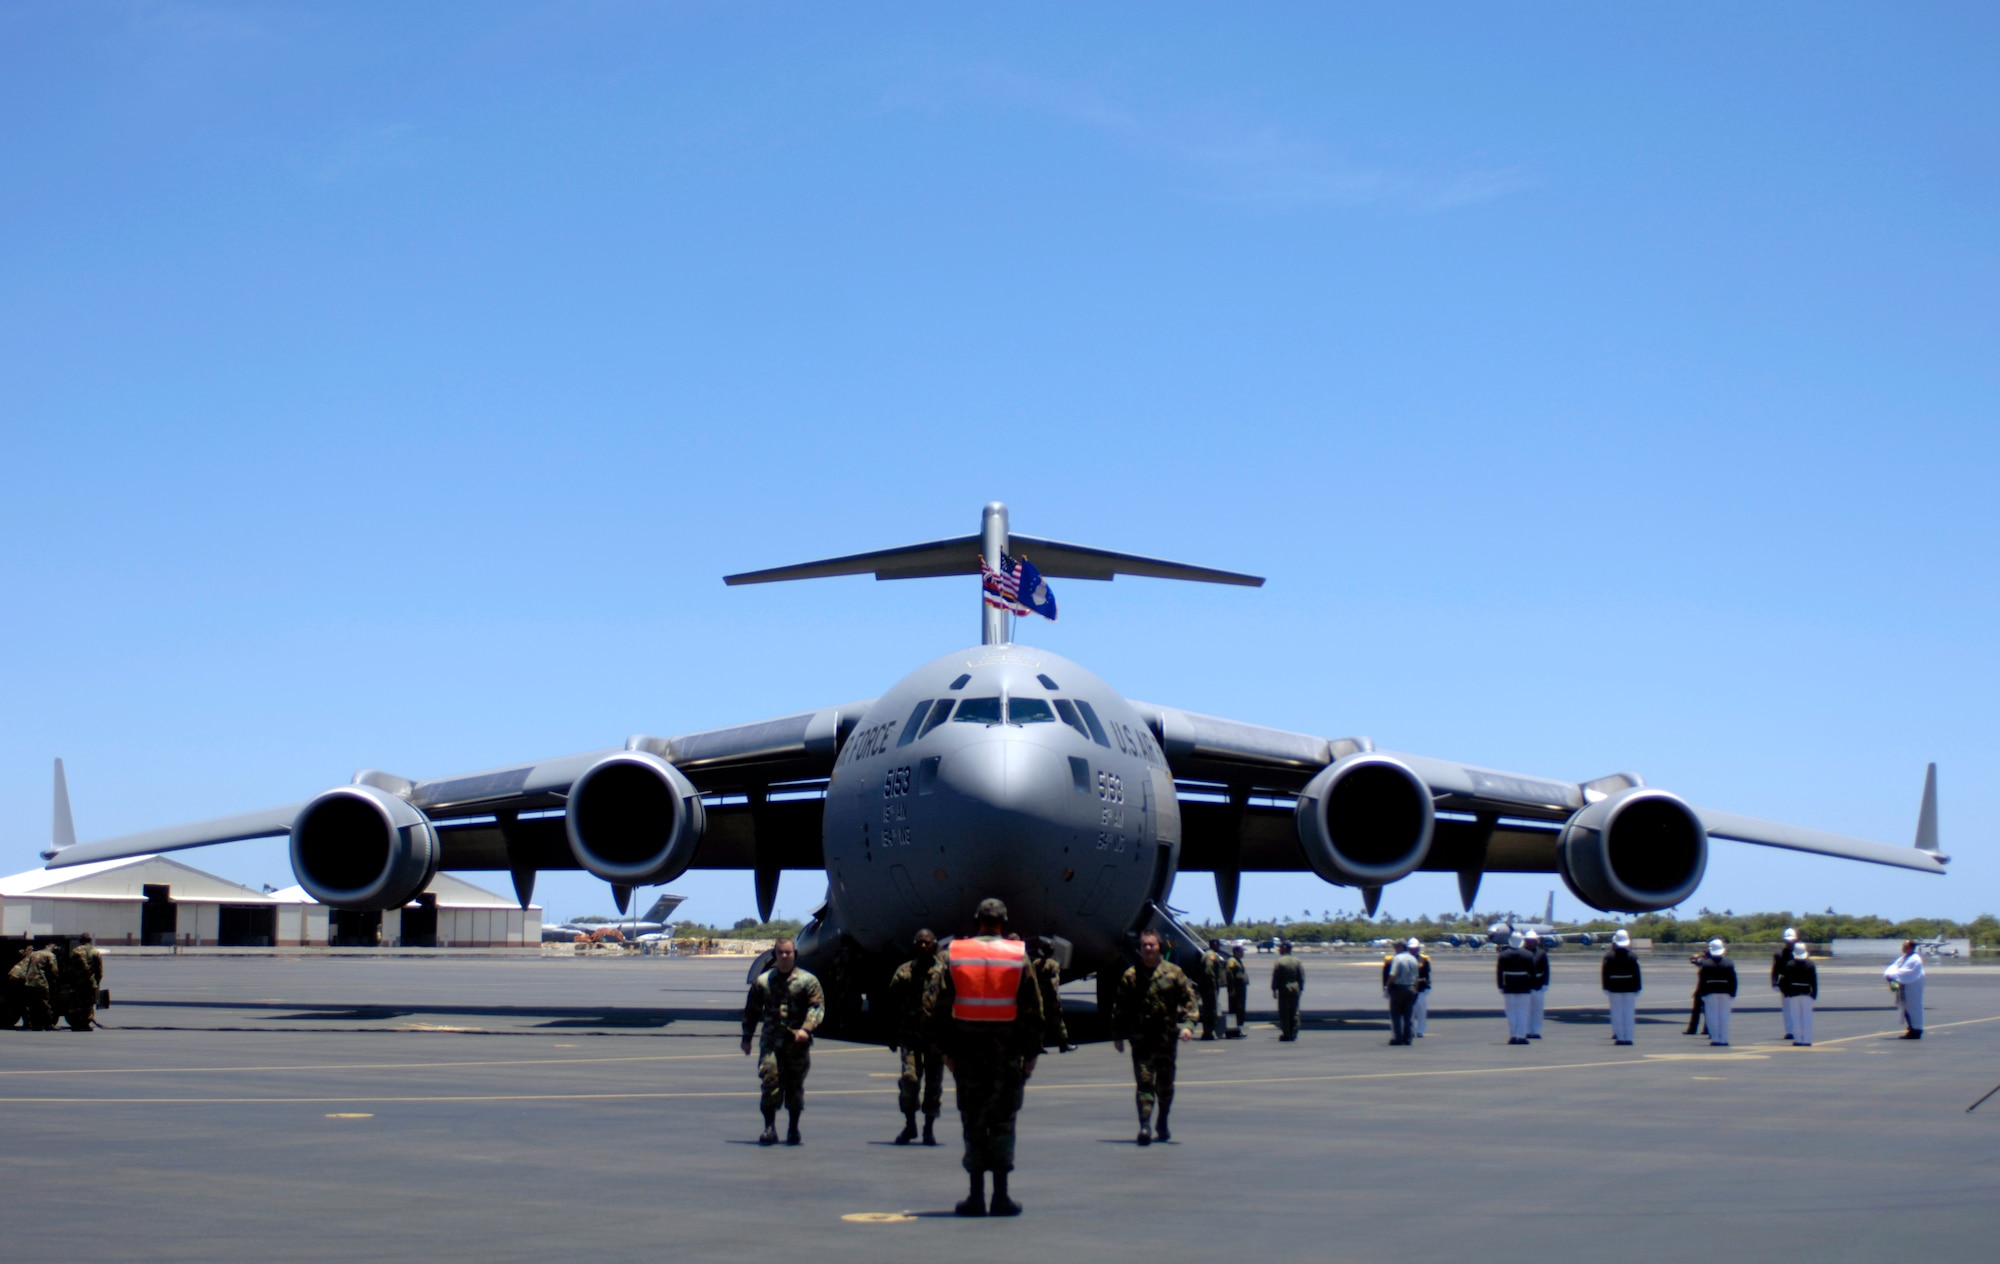 Aircraft maintainers march away from a C-17 Globemaster III after parking the aircraft at Hickam Air Force Base, Hawaii, on July 18. The "Spirit of Kamehameha-Imua" is the eighth and final C-17 for the 15th Airlift Wing at Hickam. It marks the successful transformation for the 15th AW from a support unit to an operational strategic airlift wing. The maintainers are active duty Airmen and Hawaii Air National Guardsmen. (U.S. Air Force photo/Tech. Sgt. Shane A. Cuomo)